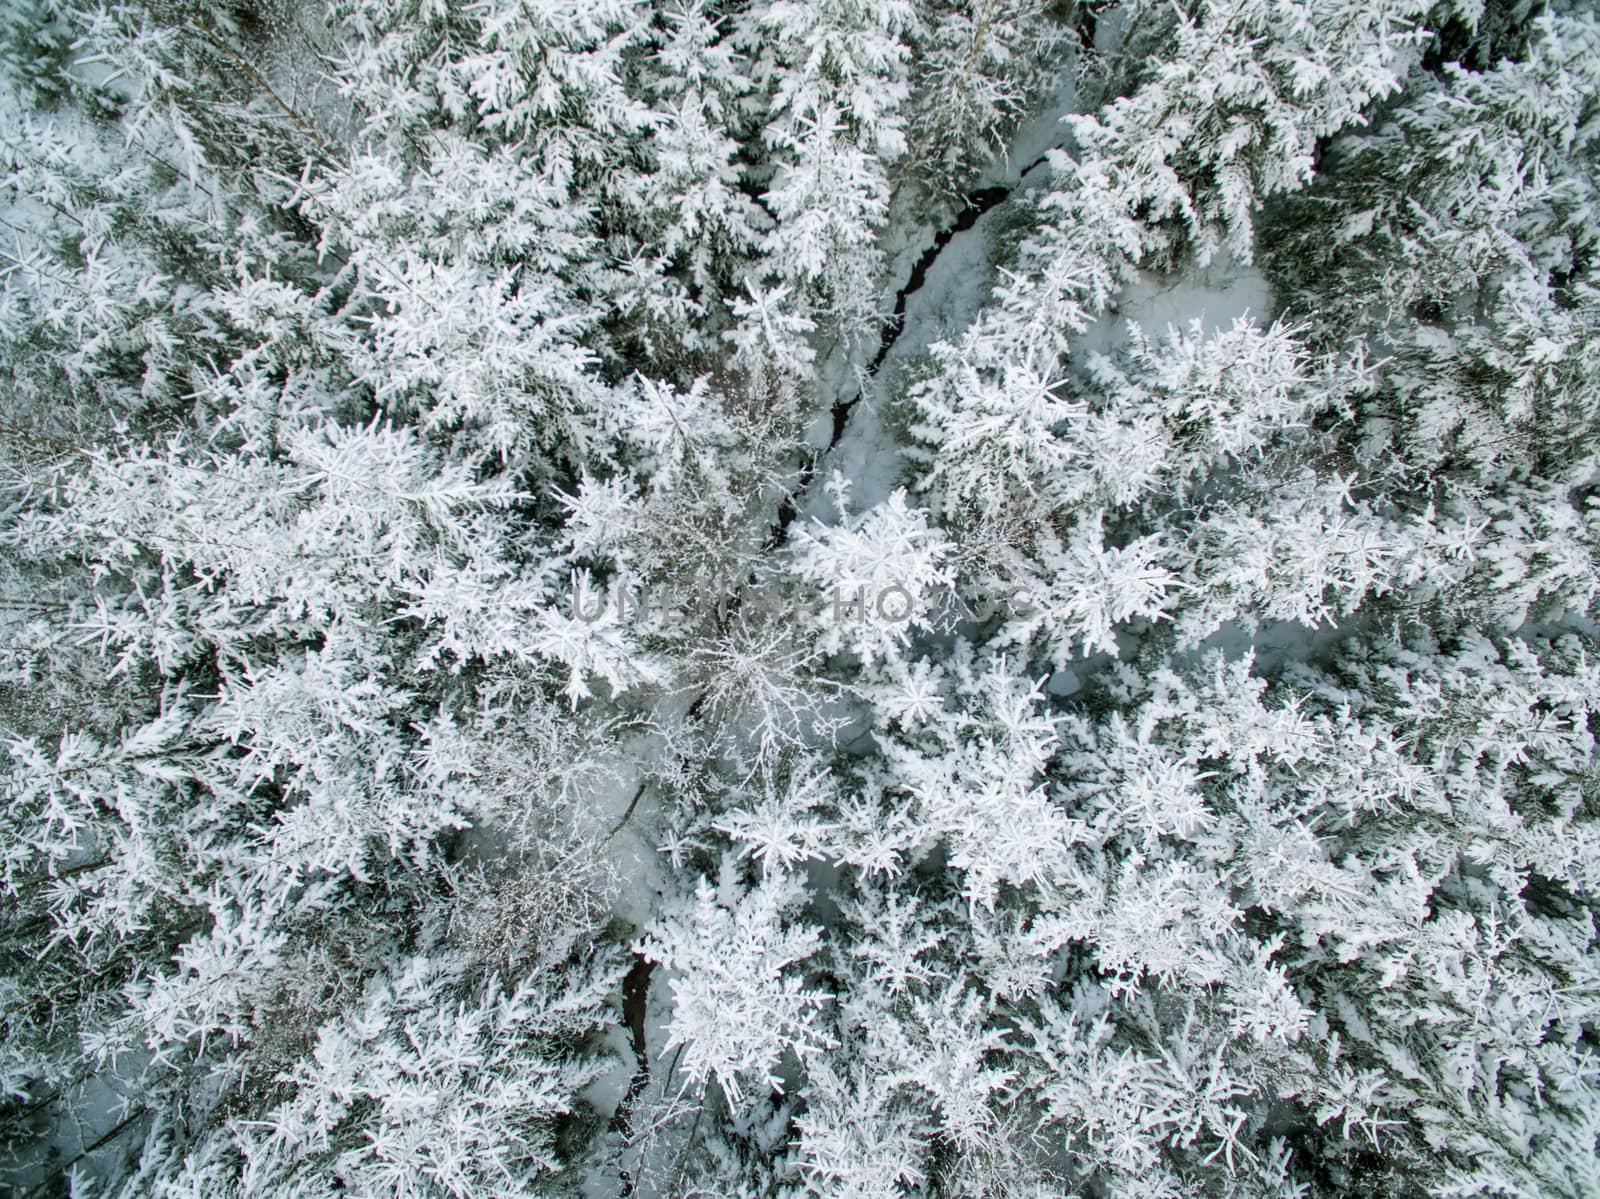 Snowy evergreen forest from above the tree tops